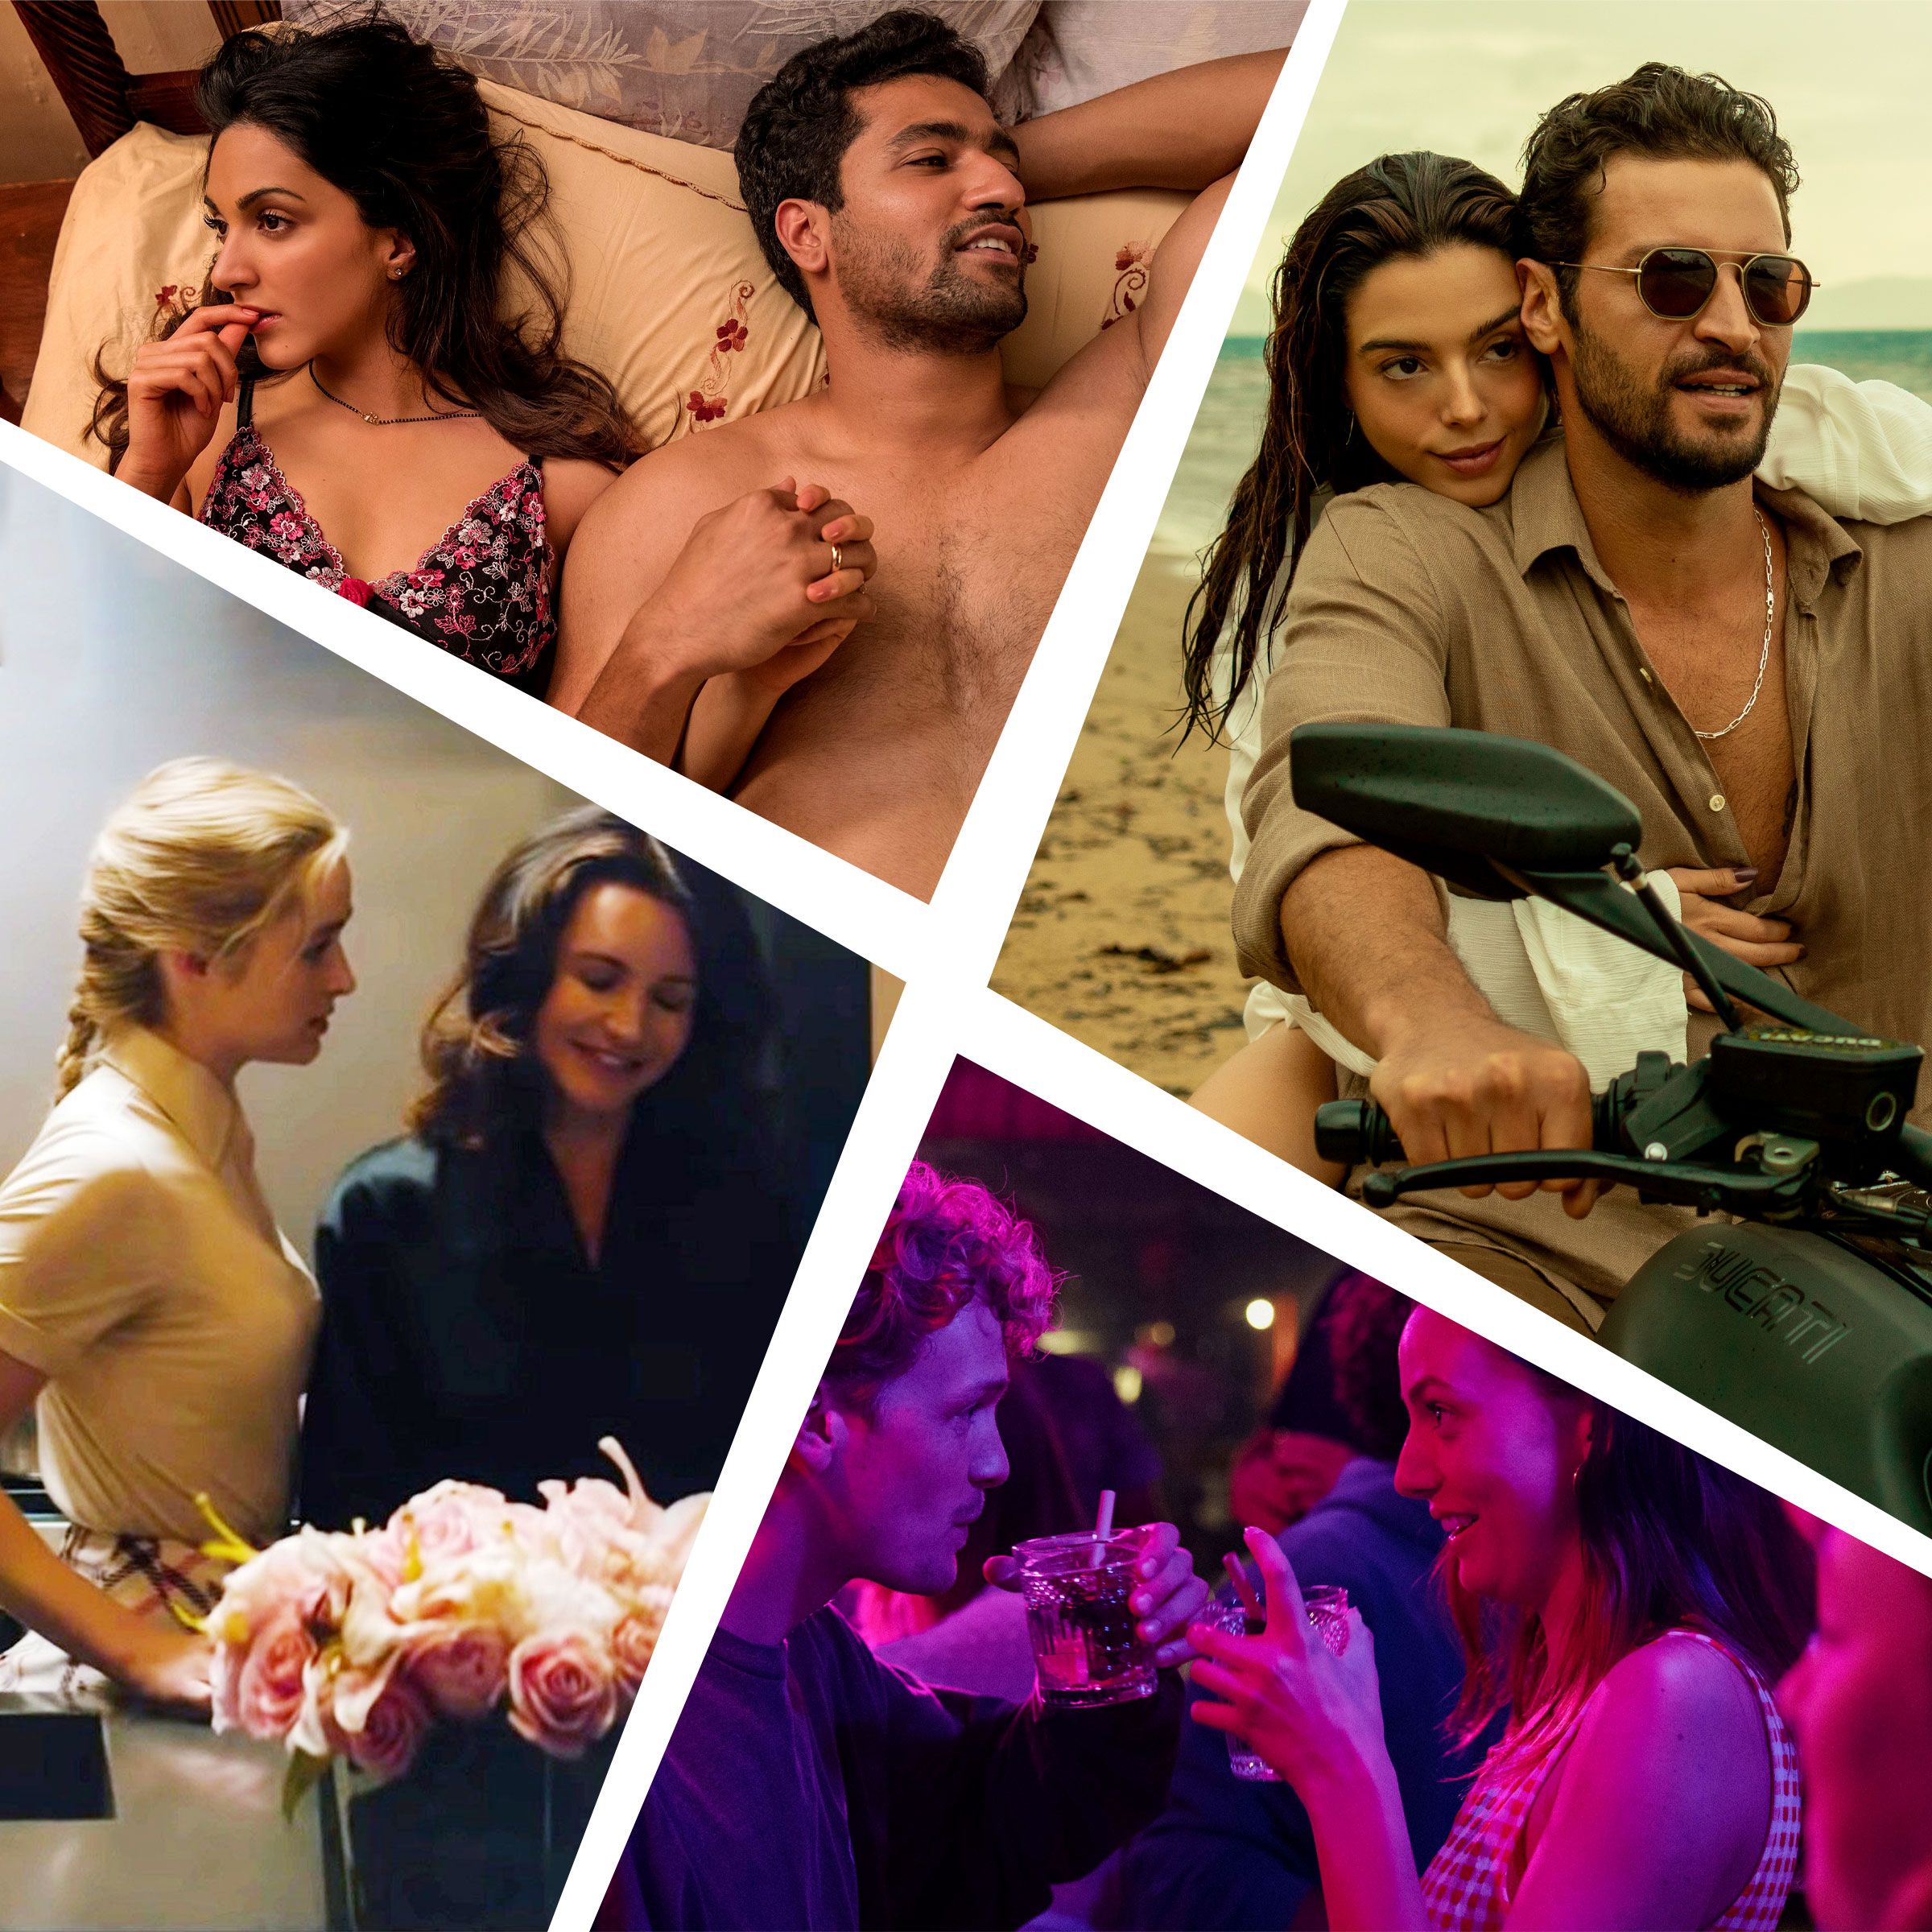 The After movies and the 5 best romantic movie series on Netflix